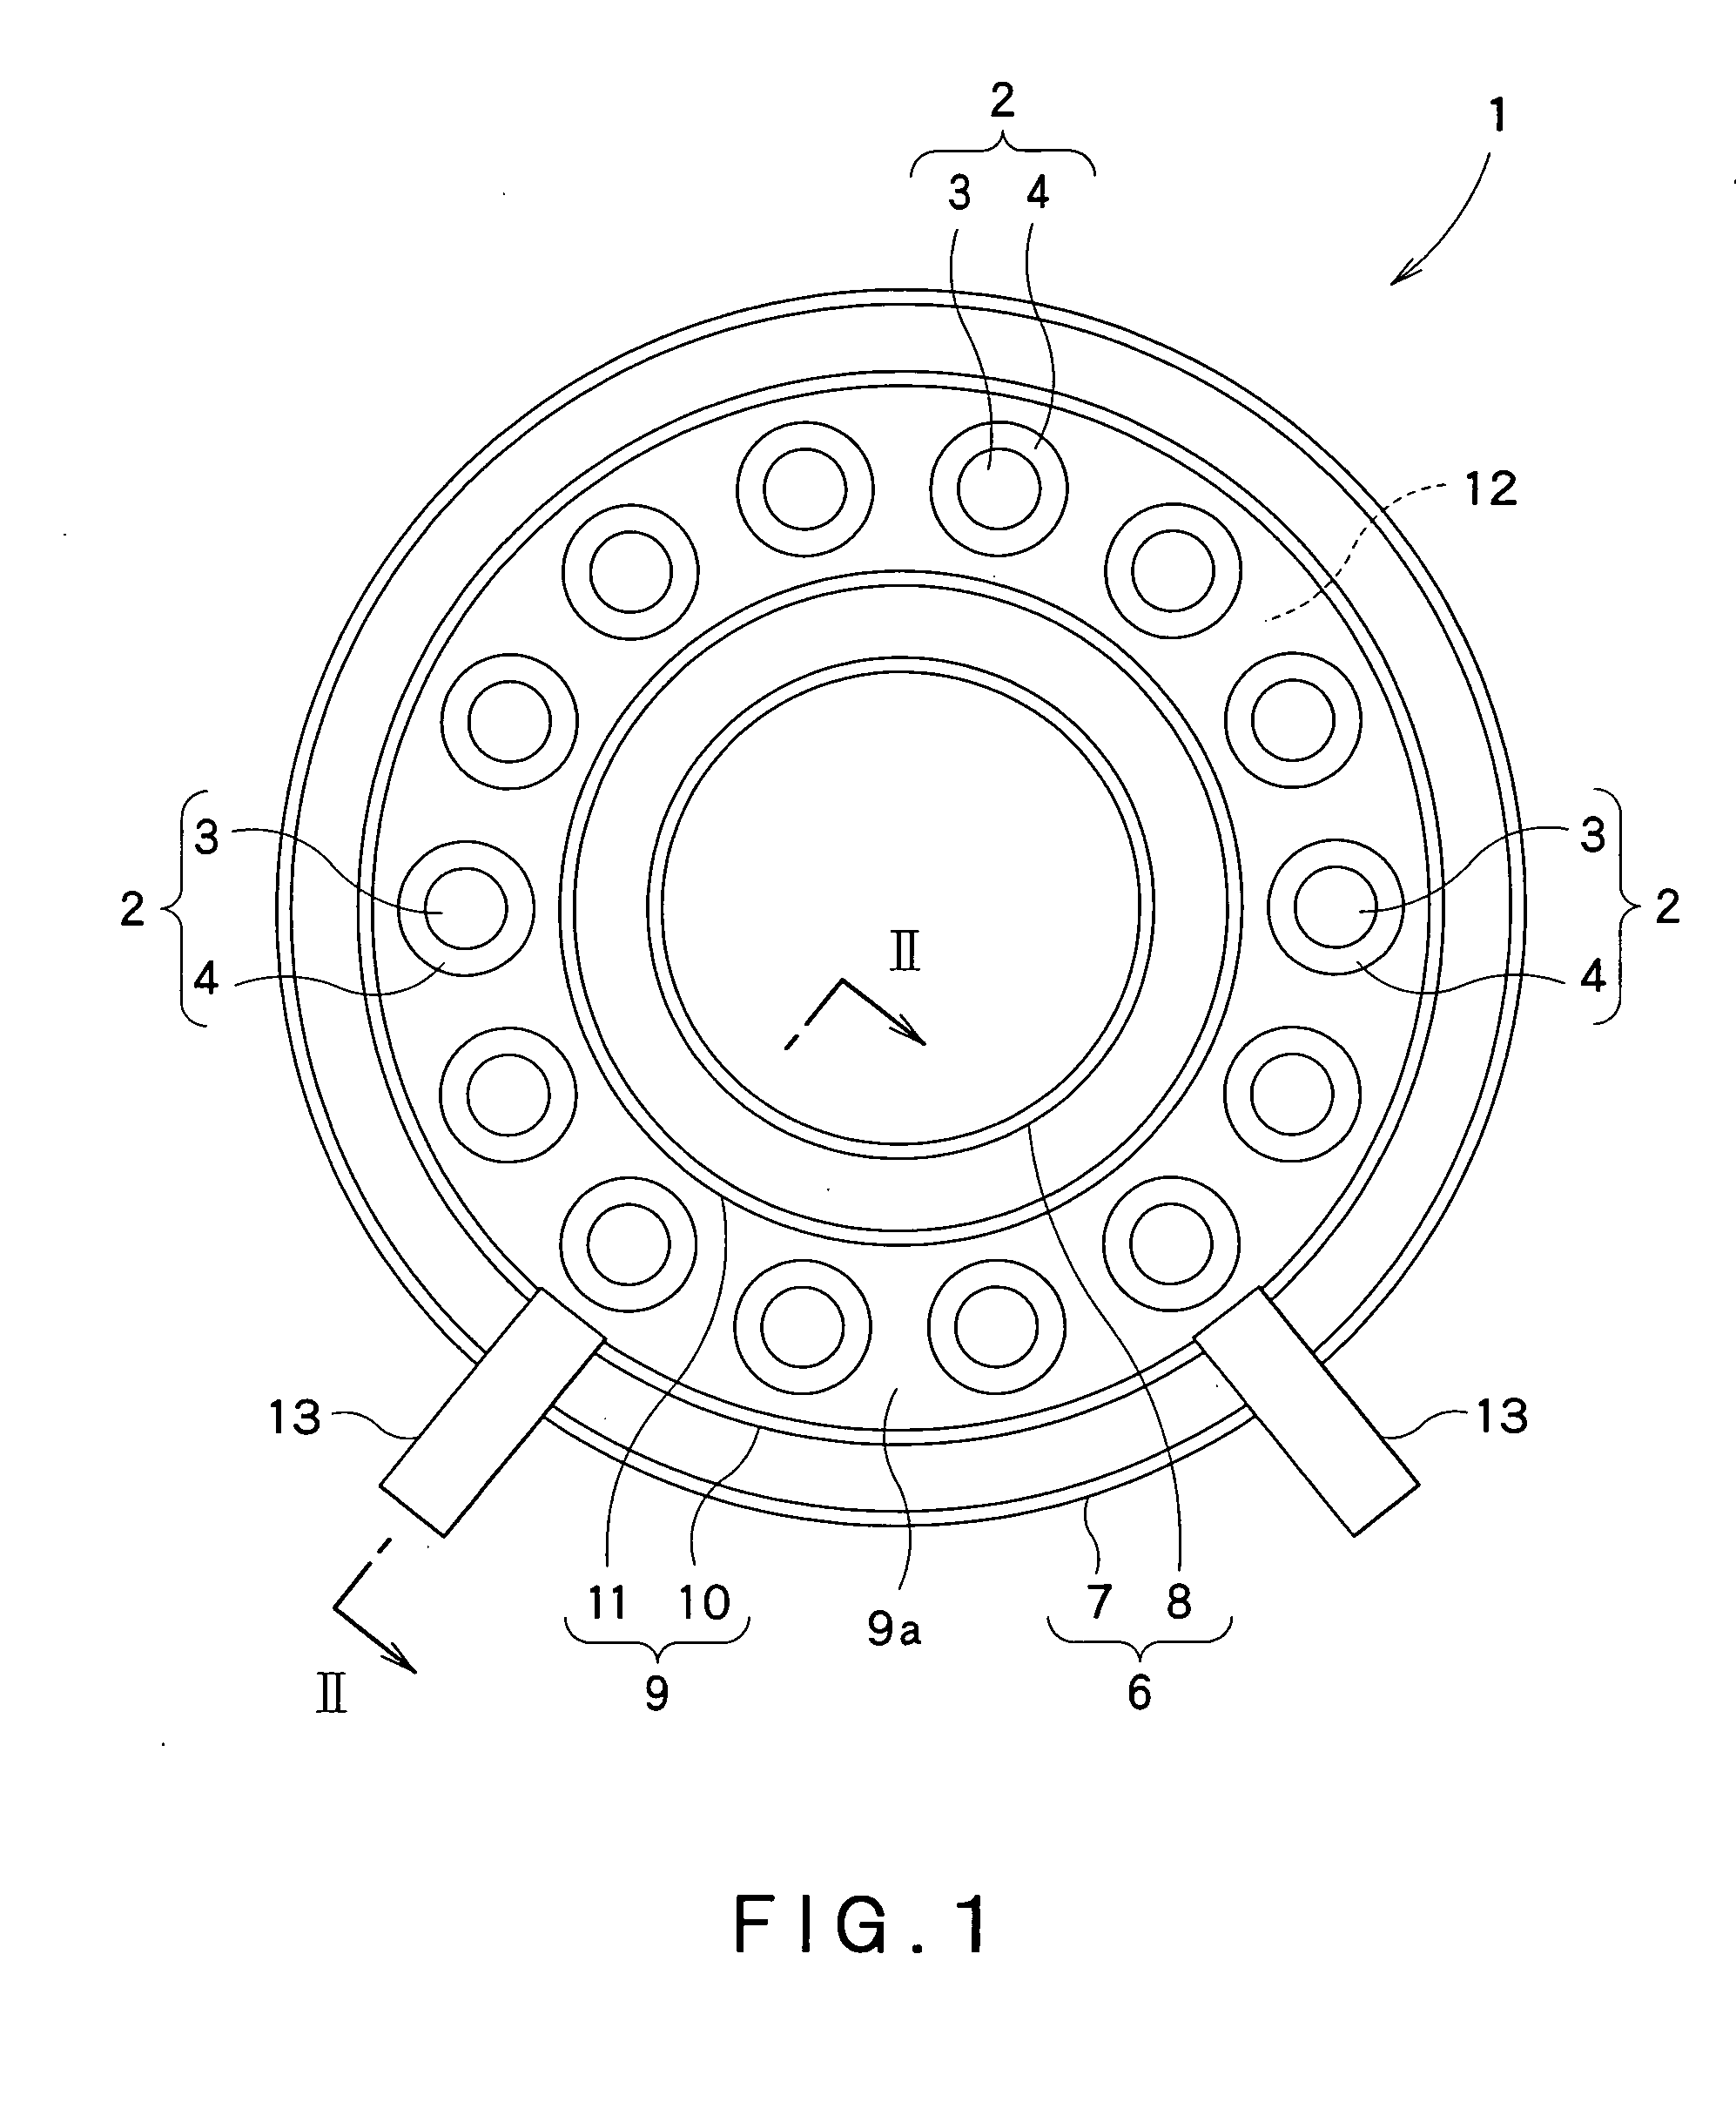 Combustor of a gas turbine engine